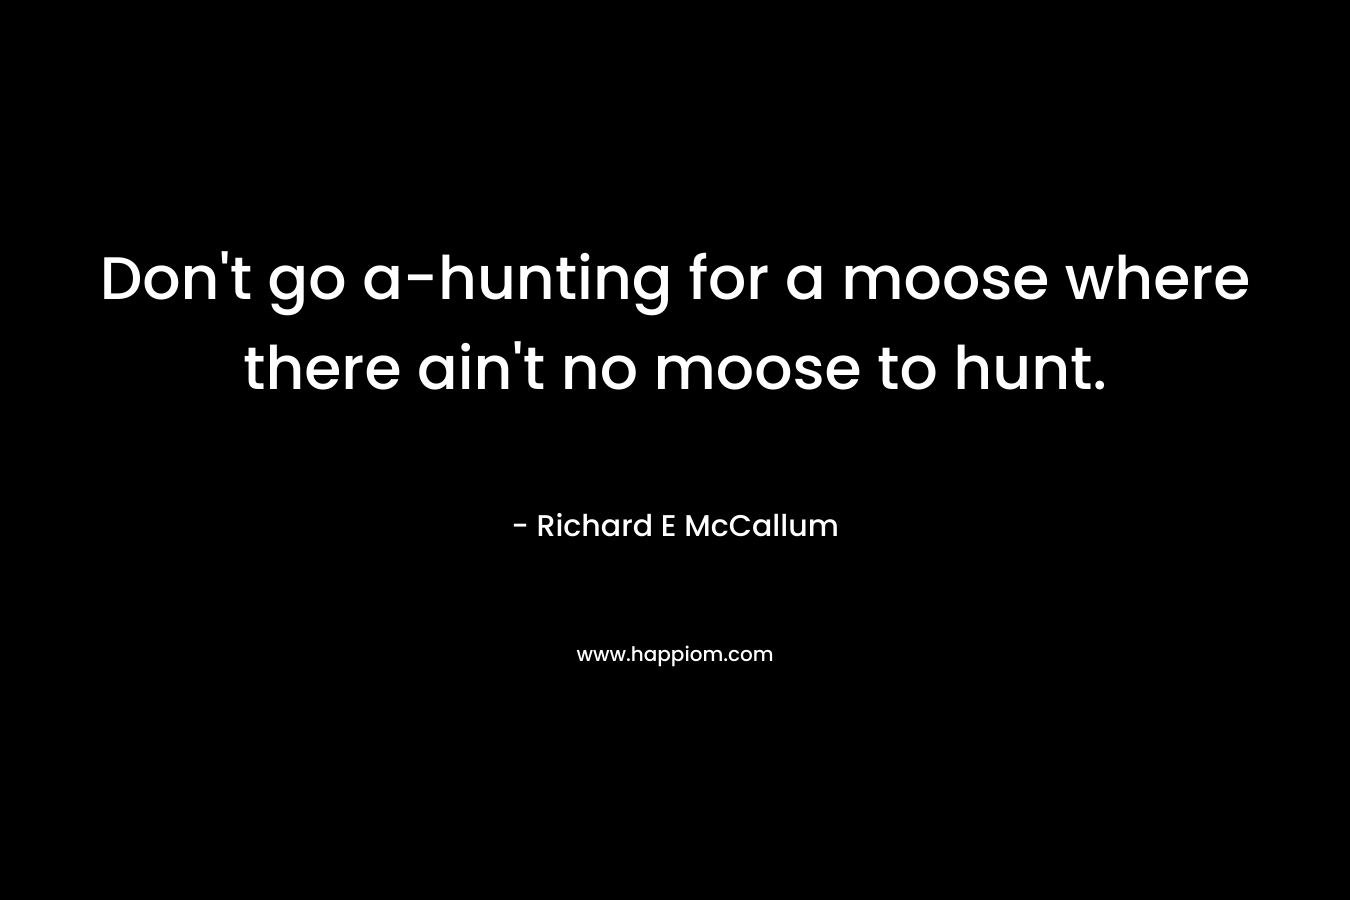 Don't go a-hunting for a moose where there ain't no moose to hunt.